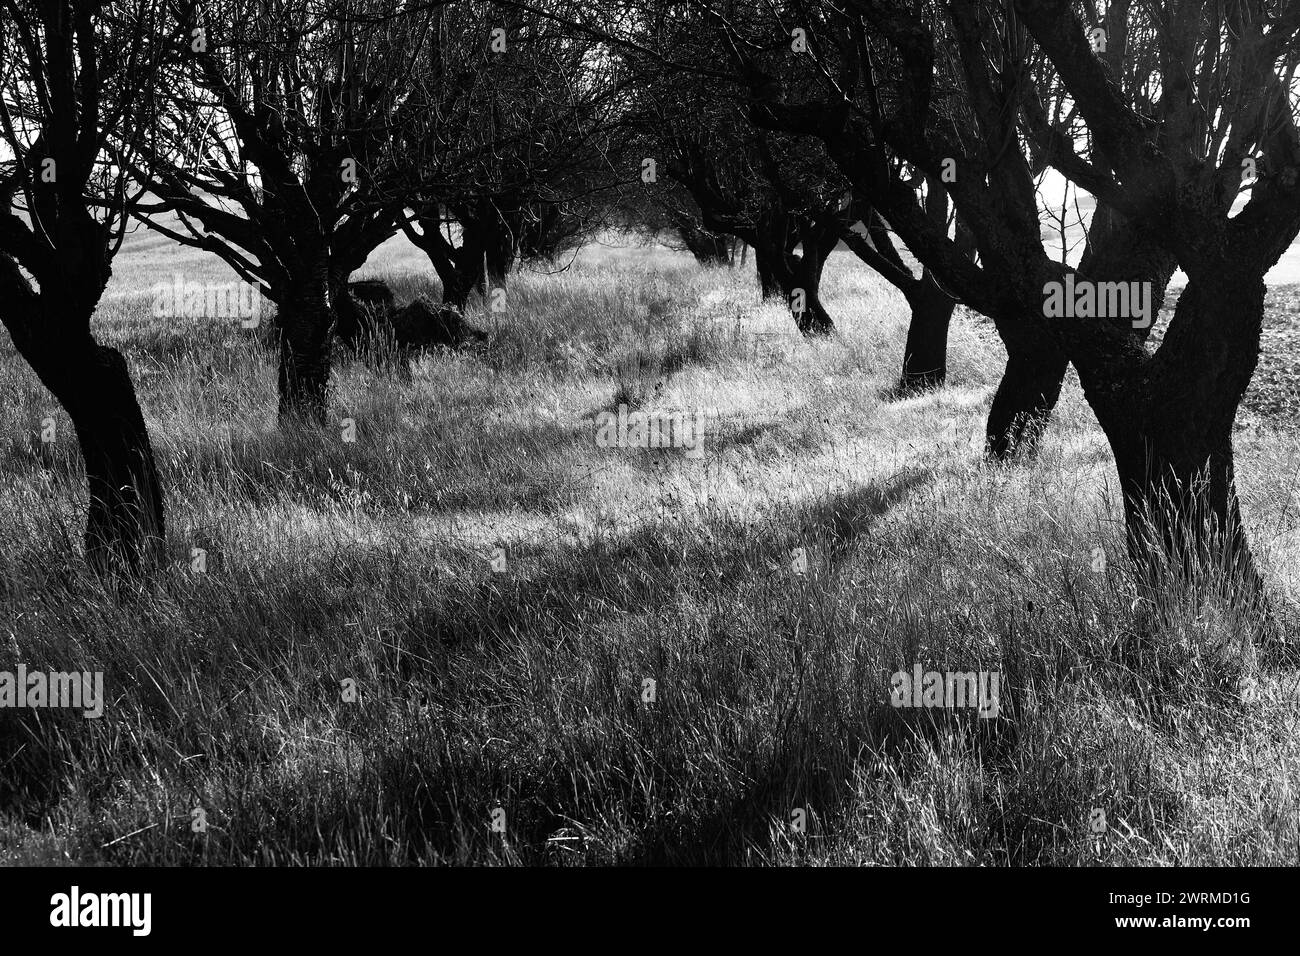 This black and white image captures a tranquil grove with twisted Walnut trees casting long shadows across a grassy field, creating a scene full of co Stock Photo